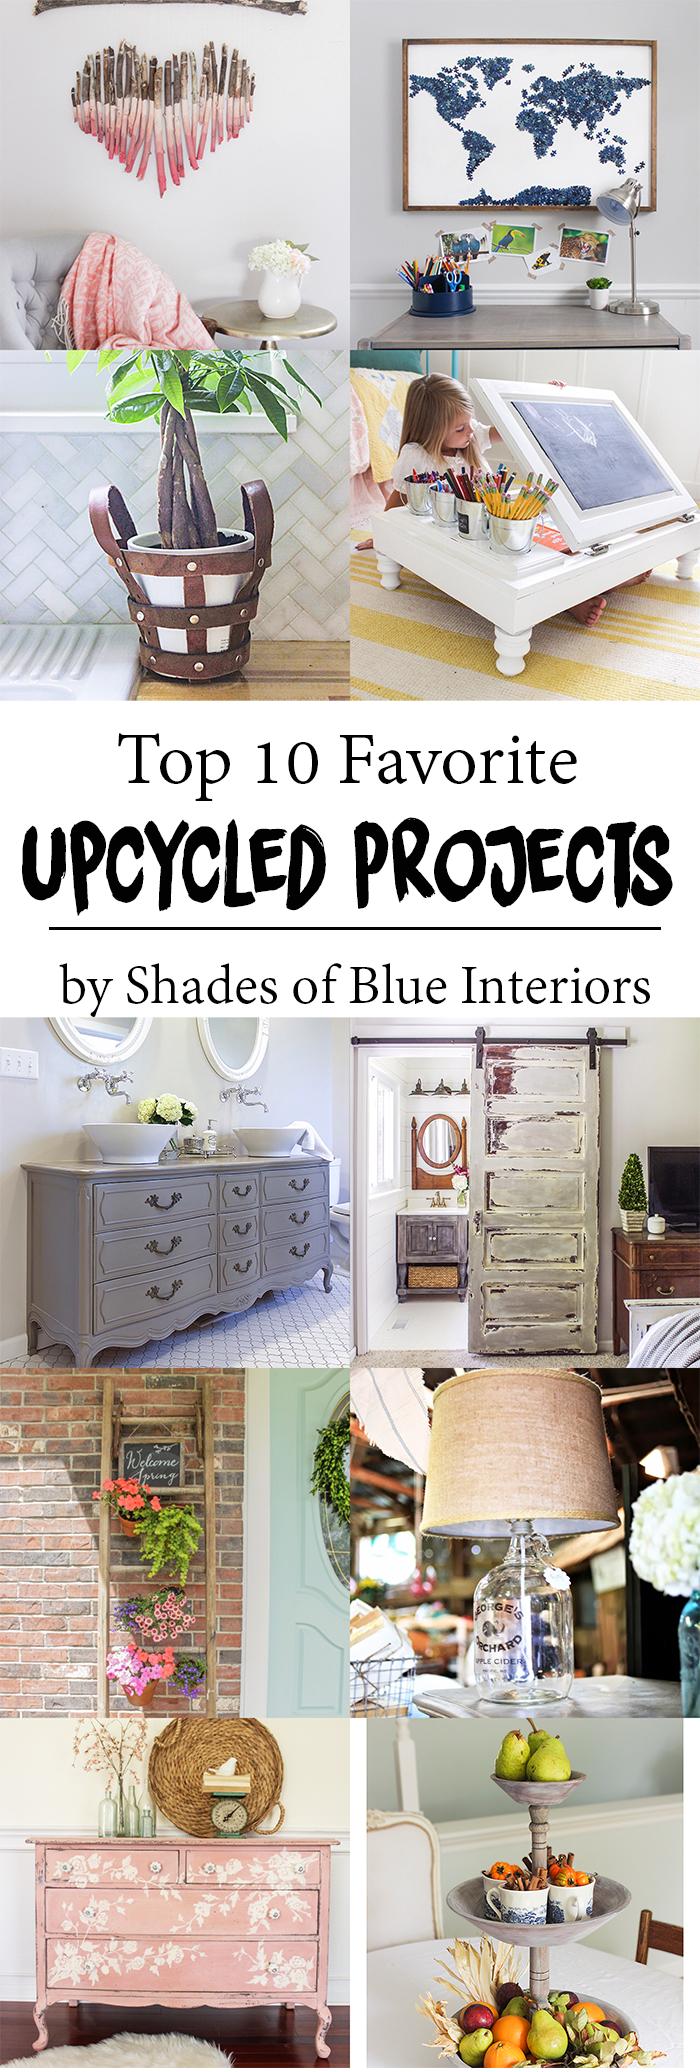 Top-10-Favorite-Upcycled-Projects